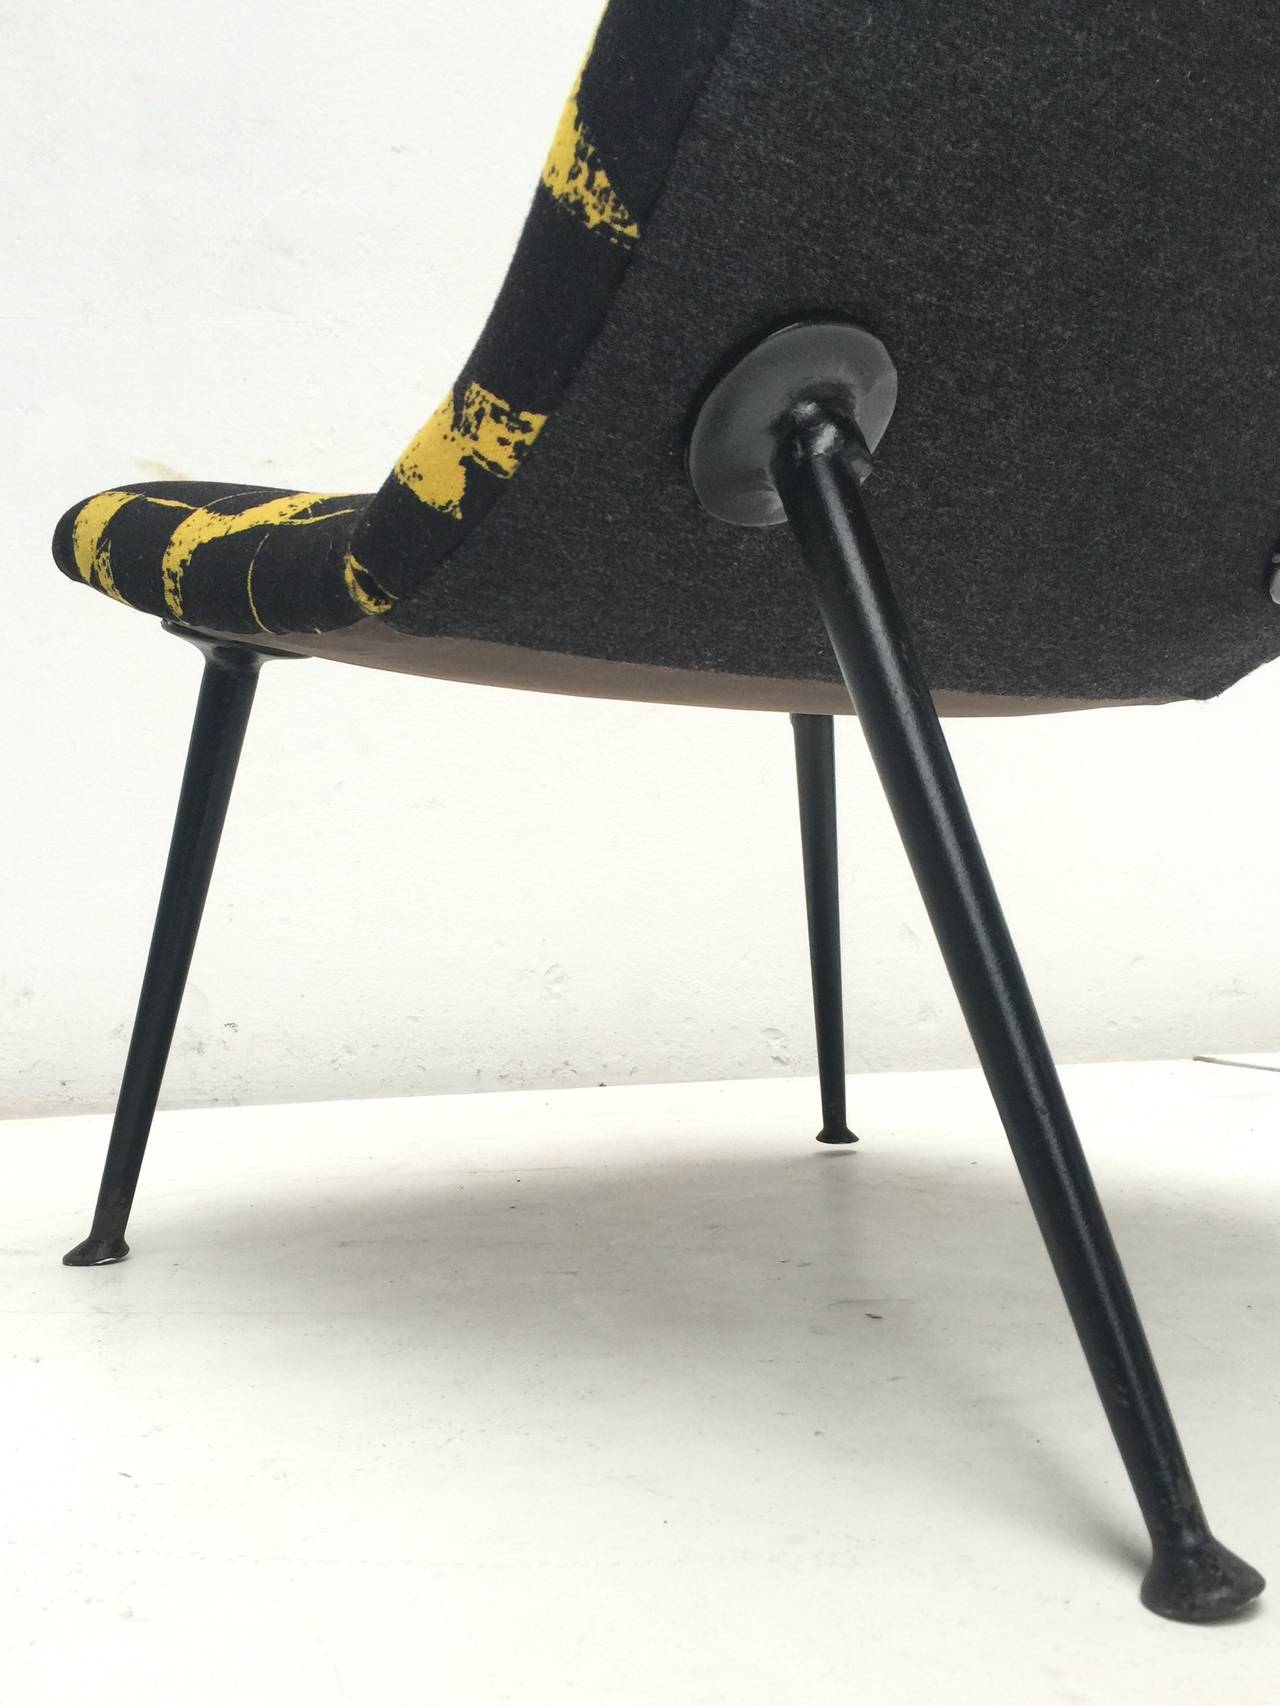 A rare easy chair model 122 by Dutch designer Theo Ruth for Artifort produced in 1955.

The chair was in terrible condition when found with the inner foam filling that turned to powder due to aging.
However as the chair had a knitted cover we